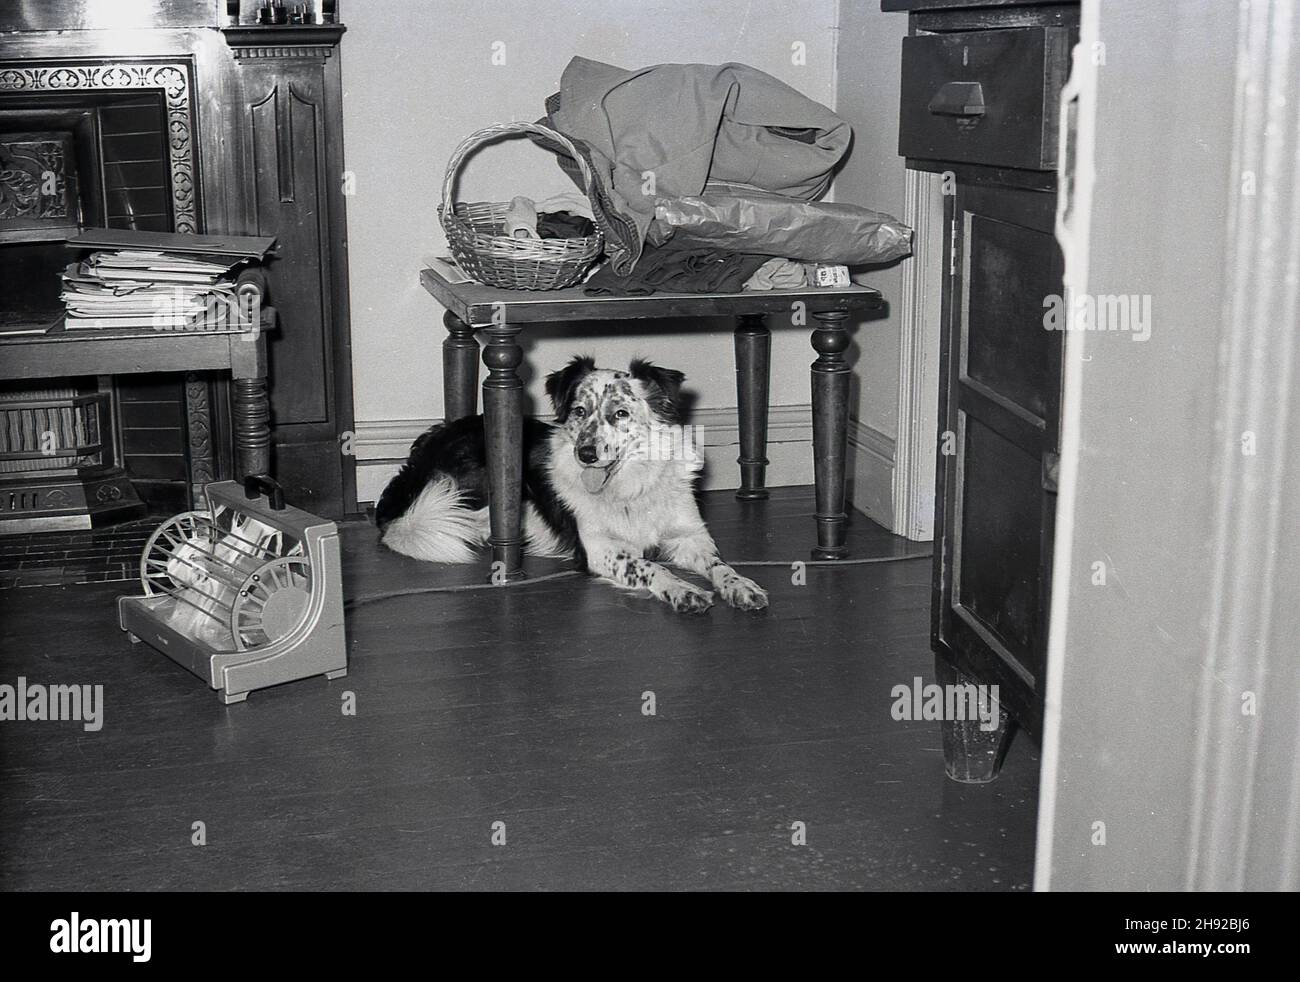 1959, historical, a collie dog lying underneath a small table in a office, with its fore legs over the cable of a small electric bar heater, London, England, UK. These small space heaters with one or two electric bars were a common site in offices and workplaces in this era as they were portable and could be plugged in anywhere. Stock Photo